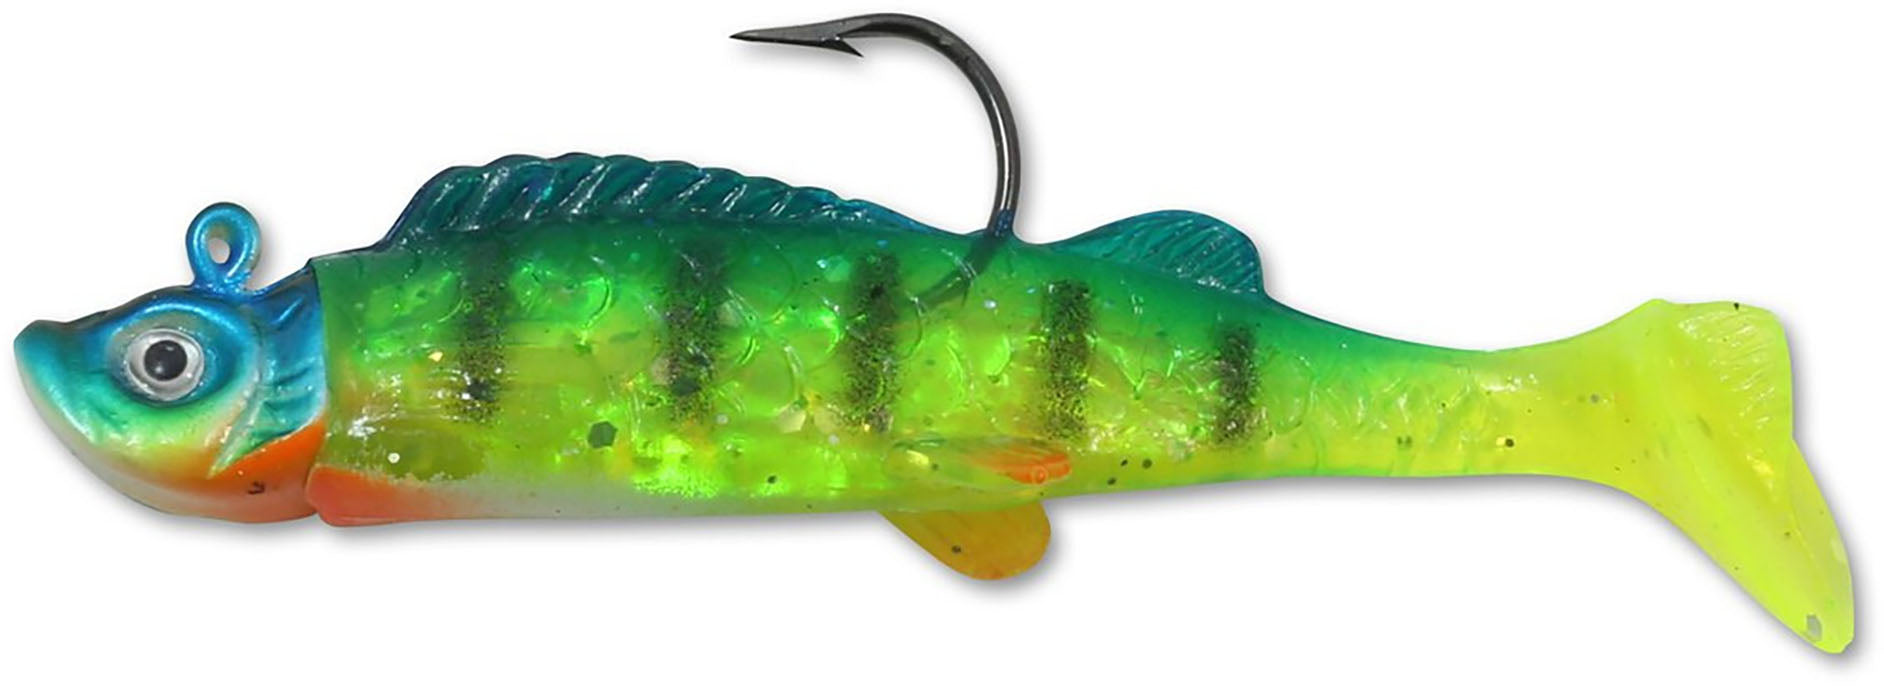 Northland Tackle Mimic Minnow Shad - 2 Pack — Discount Tackle